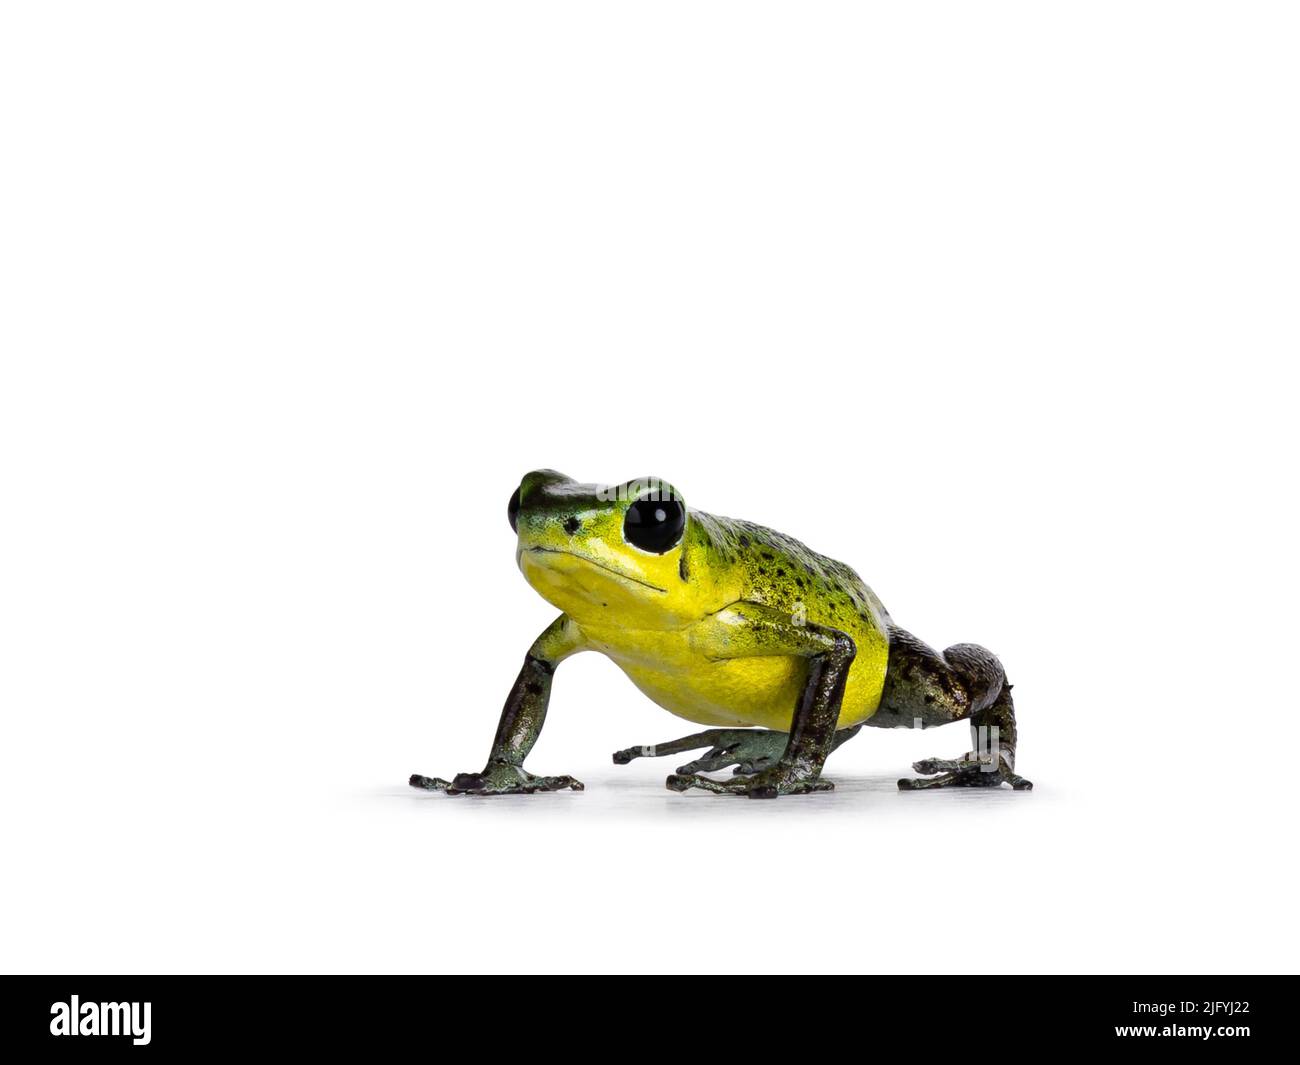 Vibrant Oophaga pumilio Punta Laurent frog standing facing front. Isolated on a white background. Stock Photo